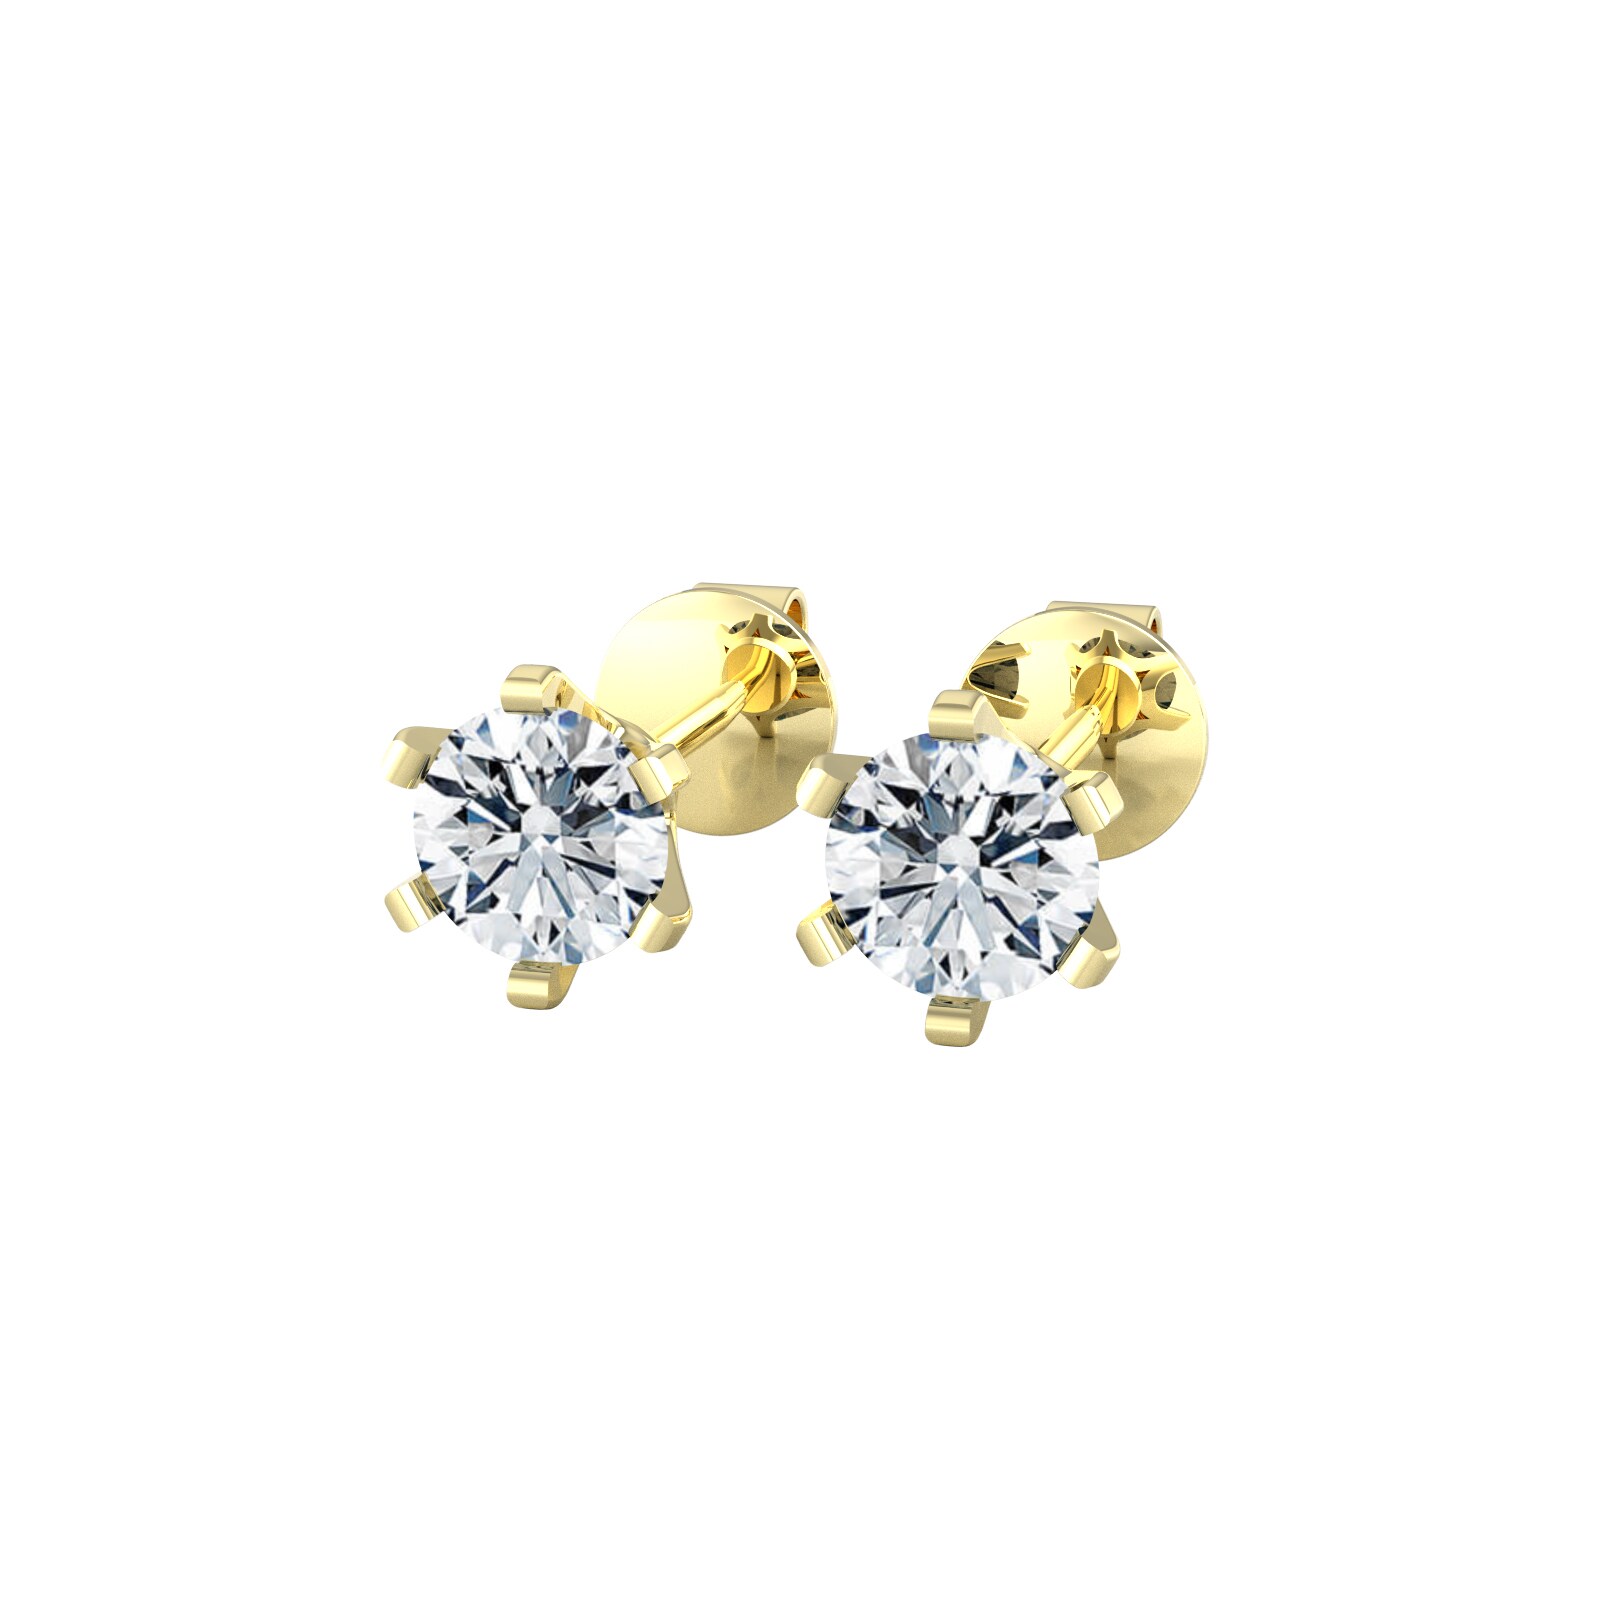 18ct Yellow Gold 0.40cttw Solitaire Diamond Stud Earrings